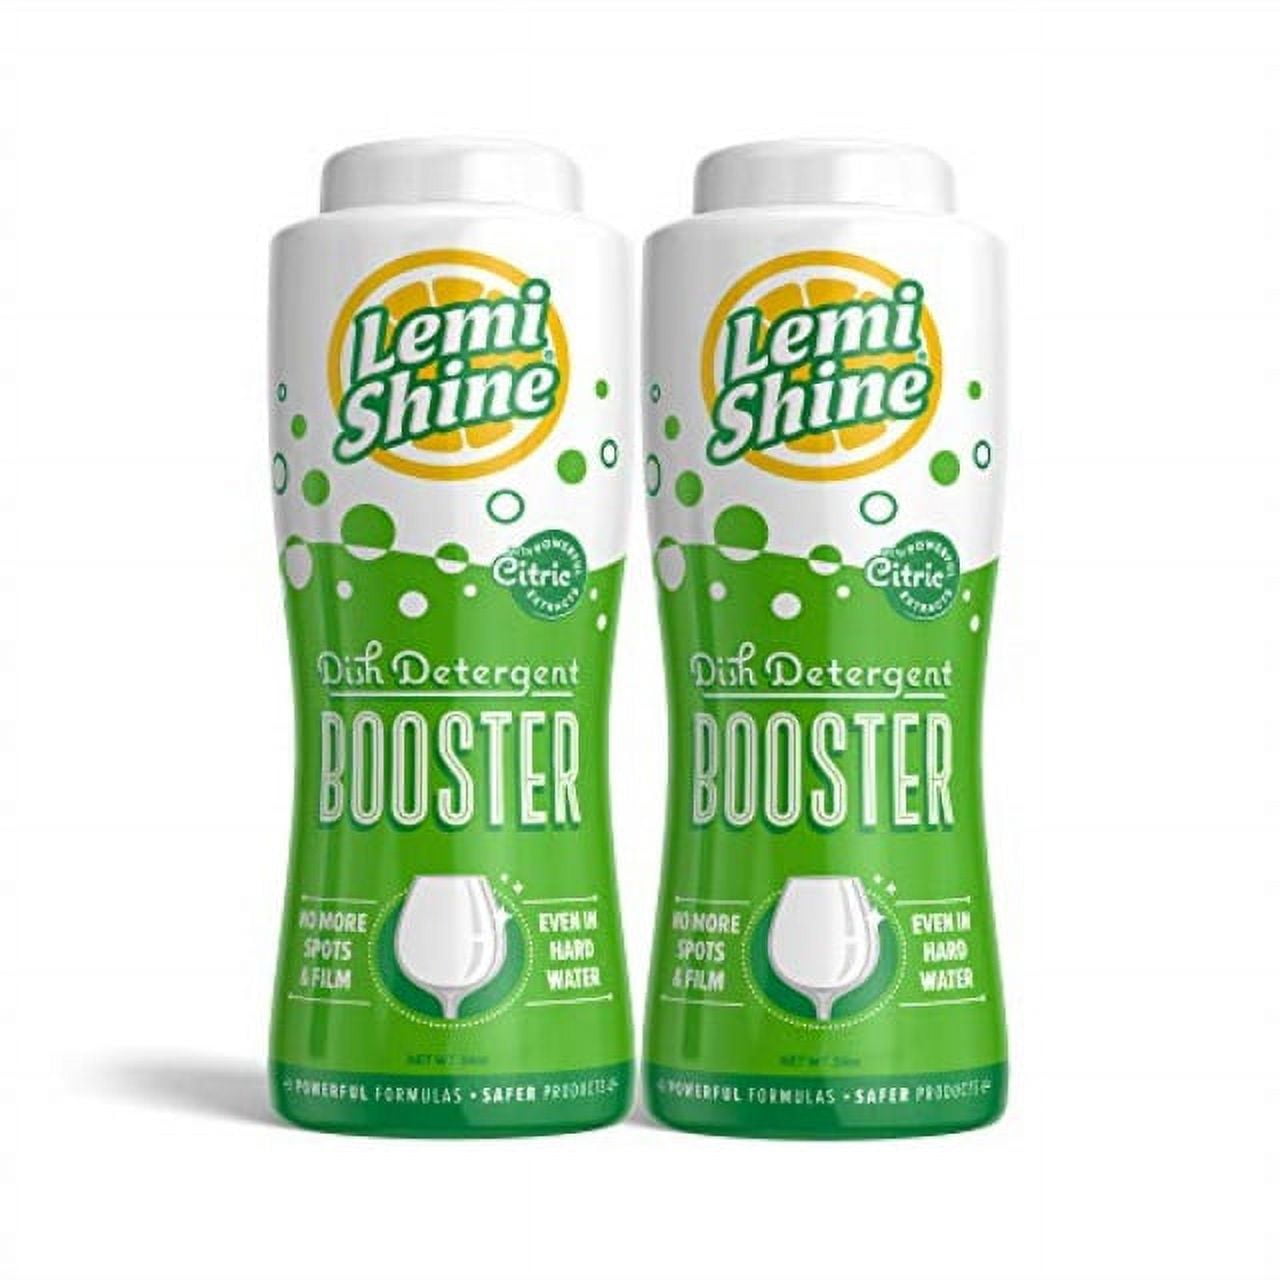 lemi shine booster natural lemon dishwasher detergent additive hard water stain remover for dishes and glassware 24oz - 2 pack bundle